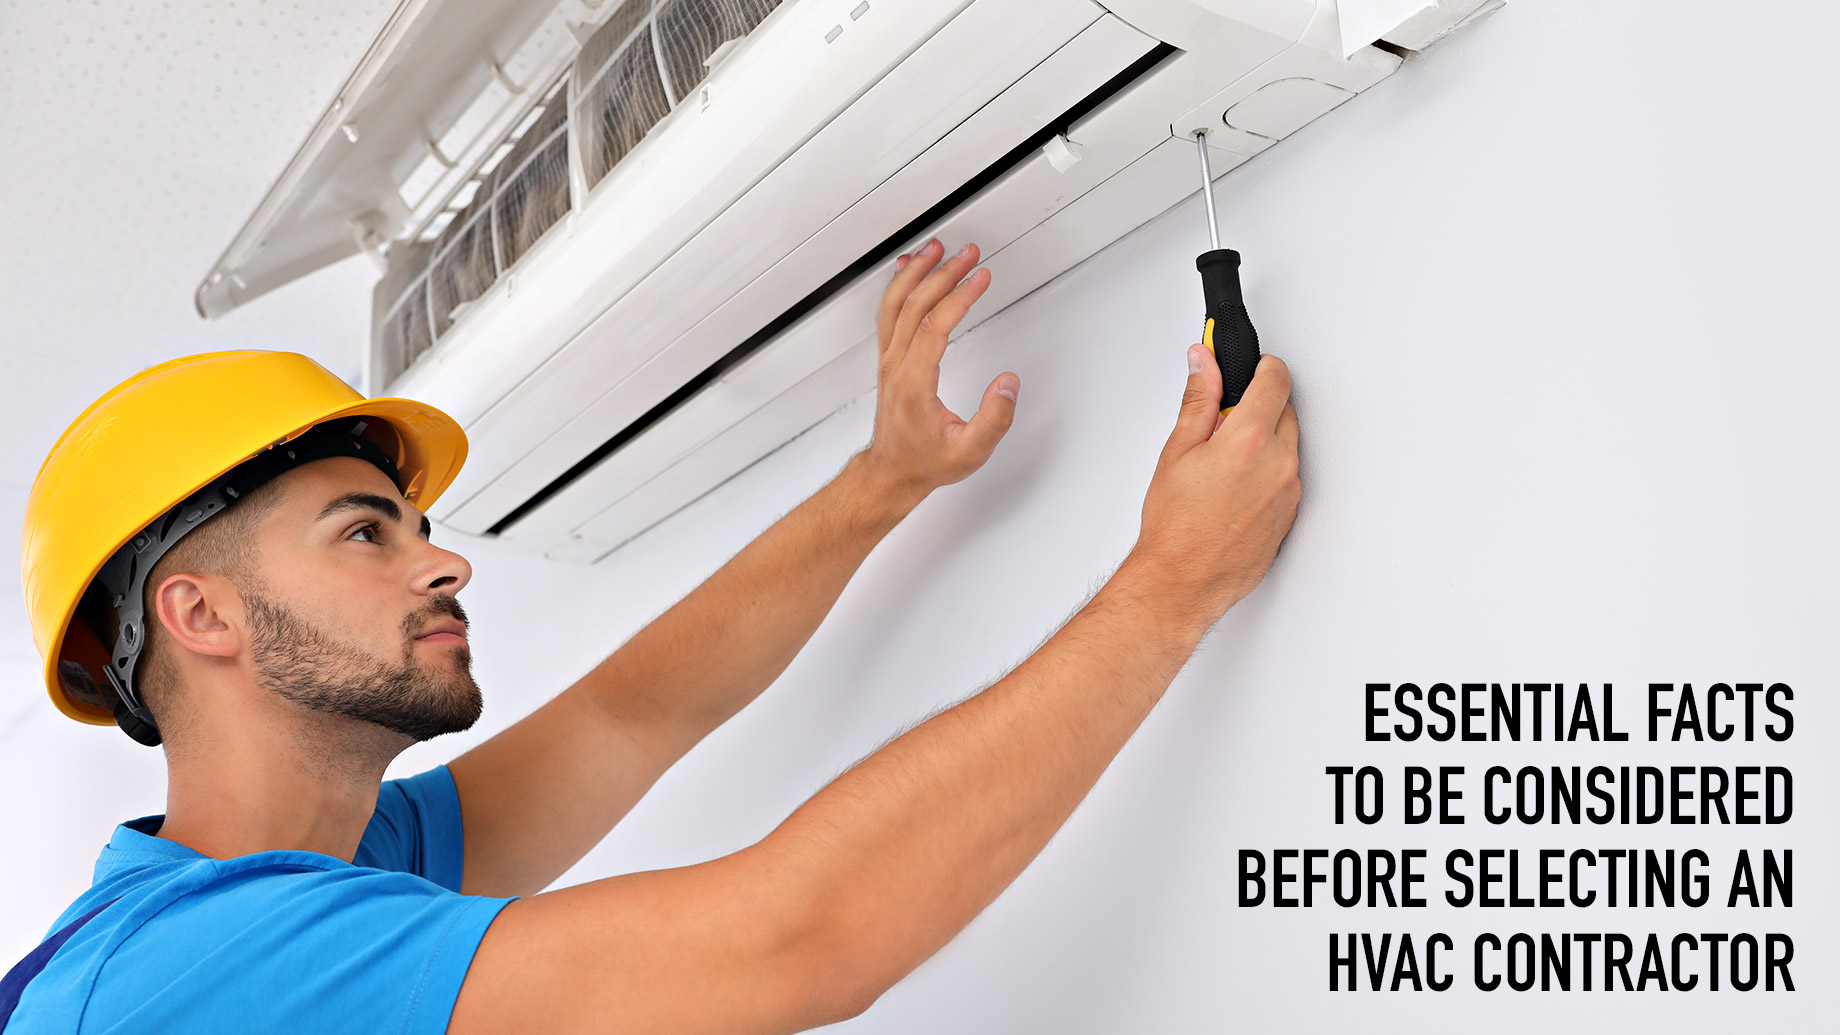 Essential Facts To Be Considered Before Selecting An HVAC Contractor